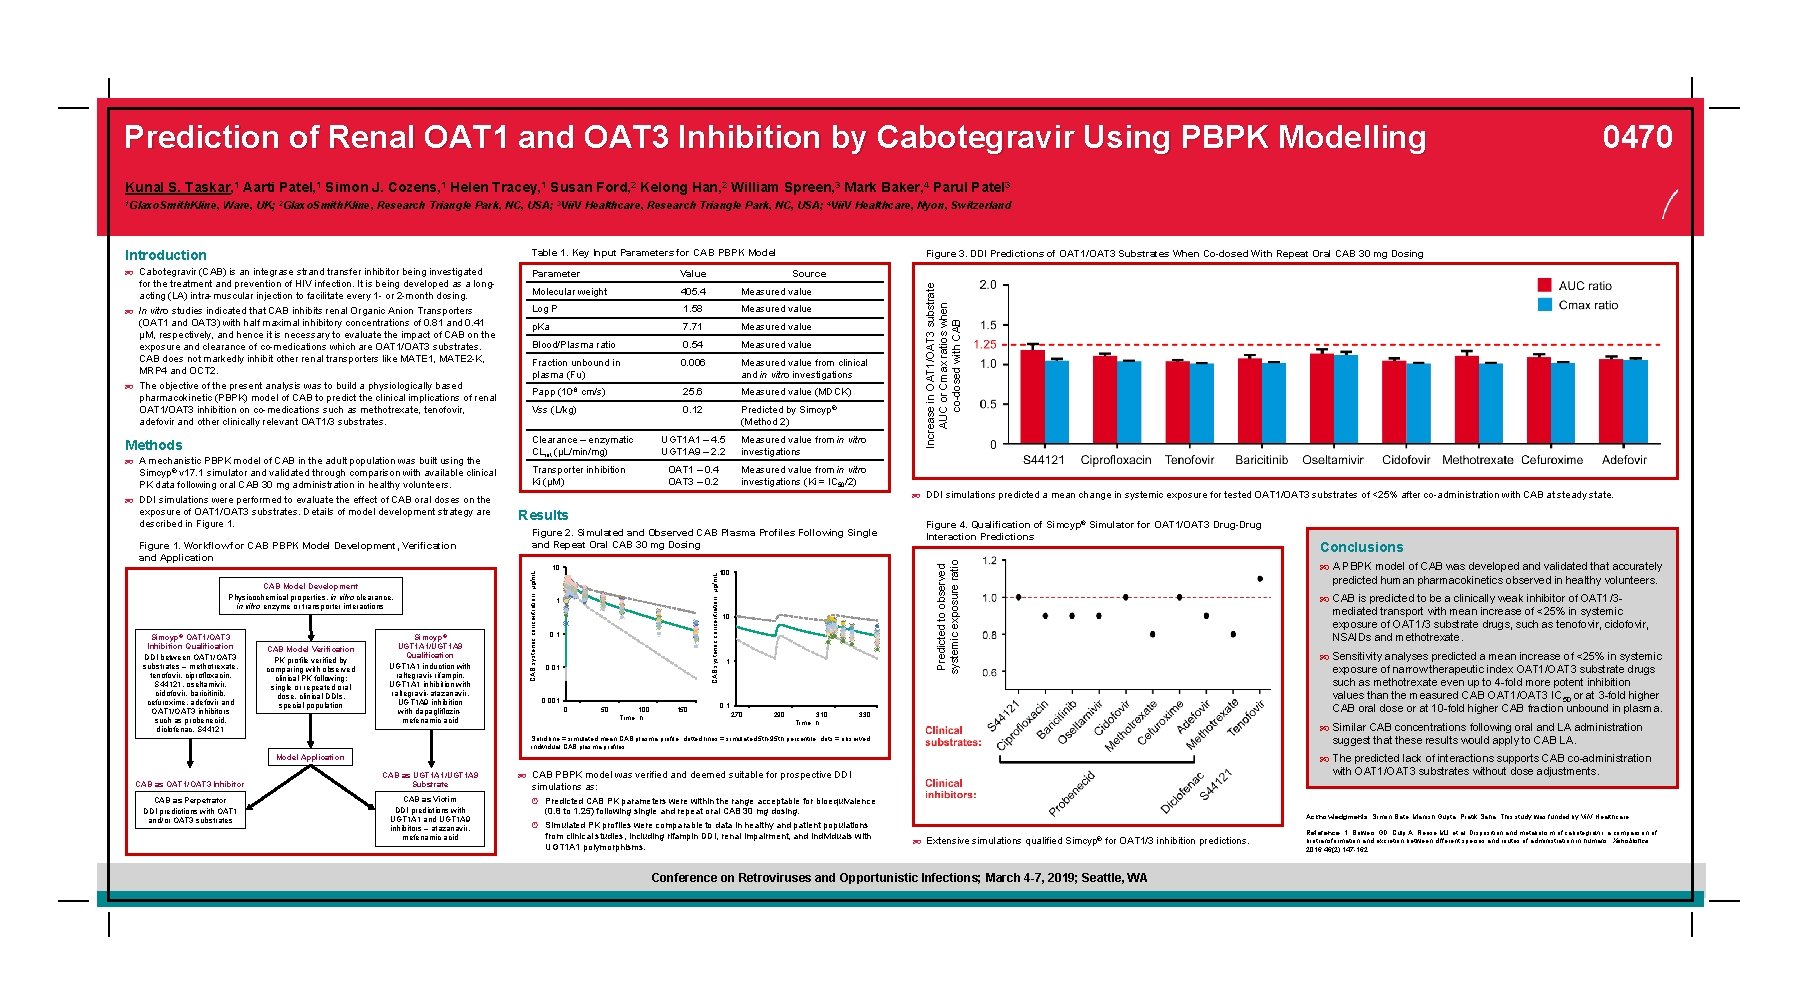 Prediction of Renal OAT 1 and OAT 3 Inhibition by Cabotegravir Using PBPK Modelling